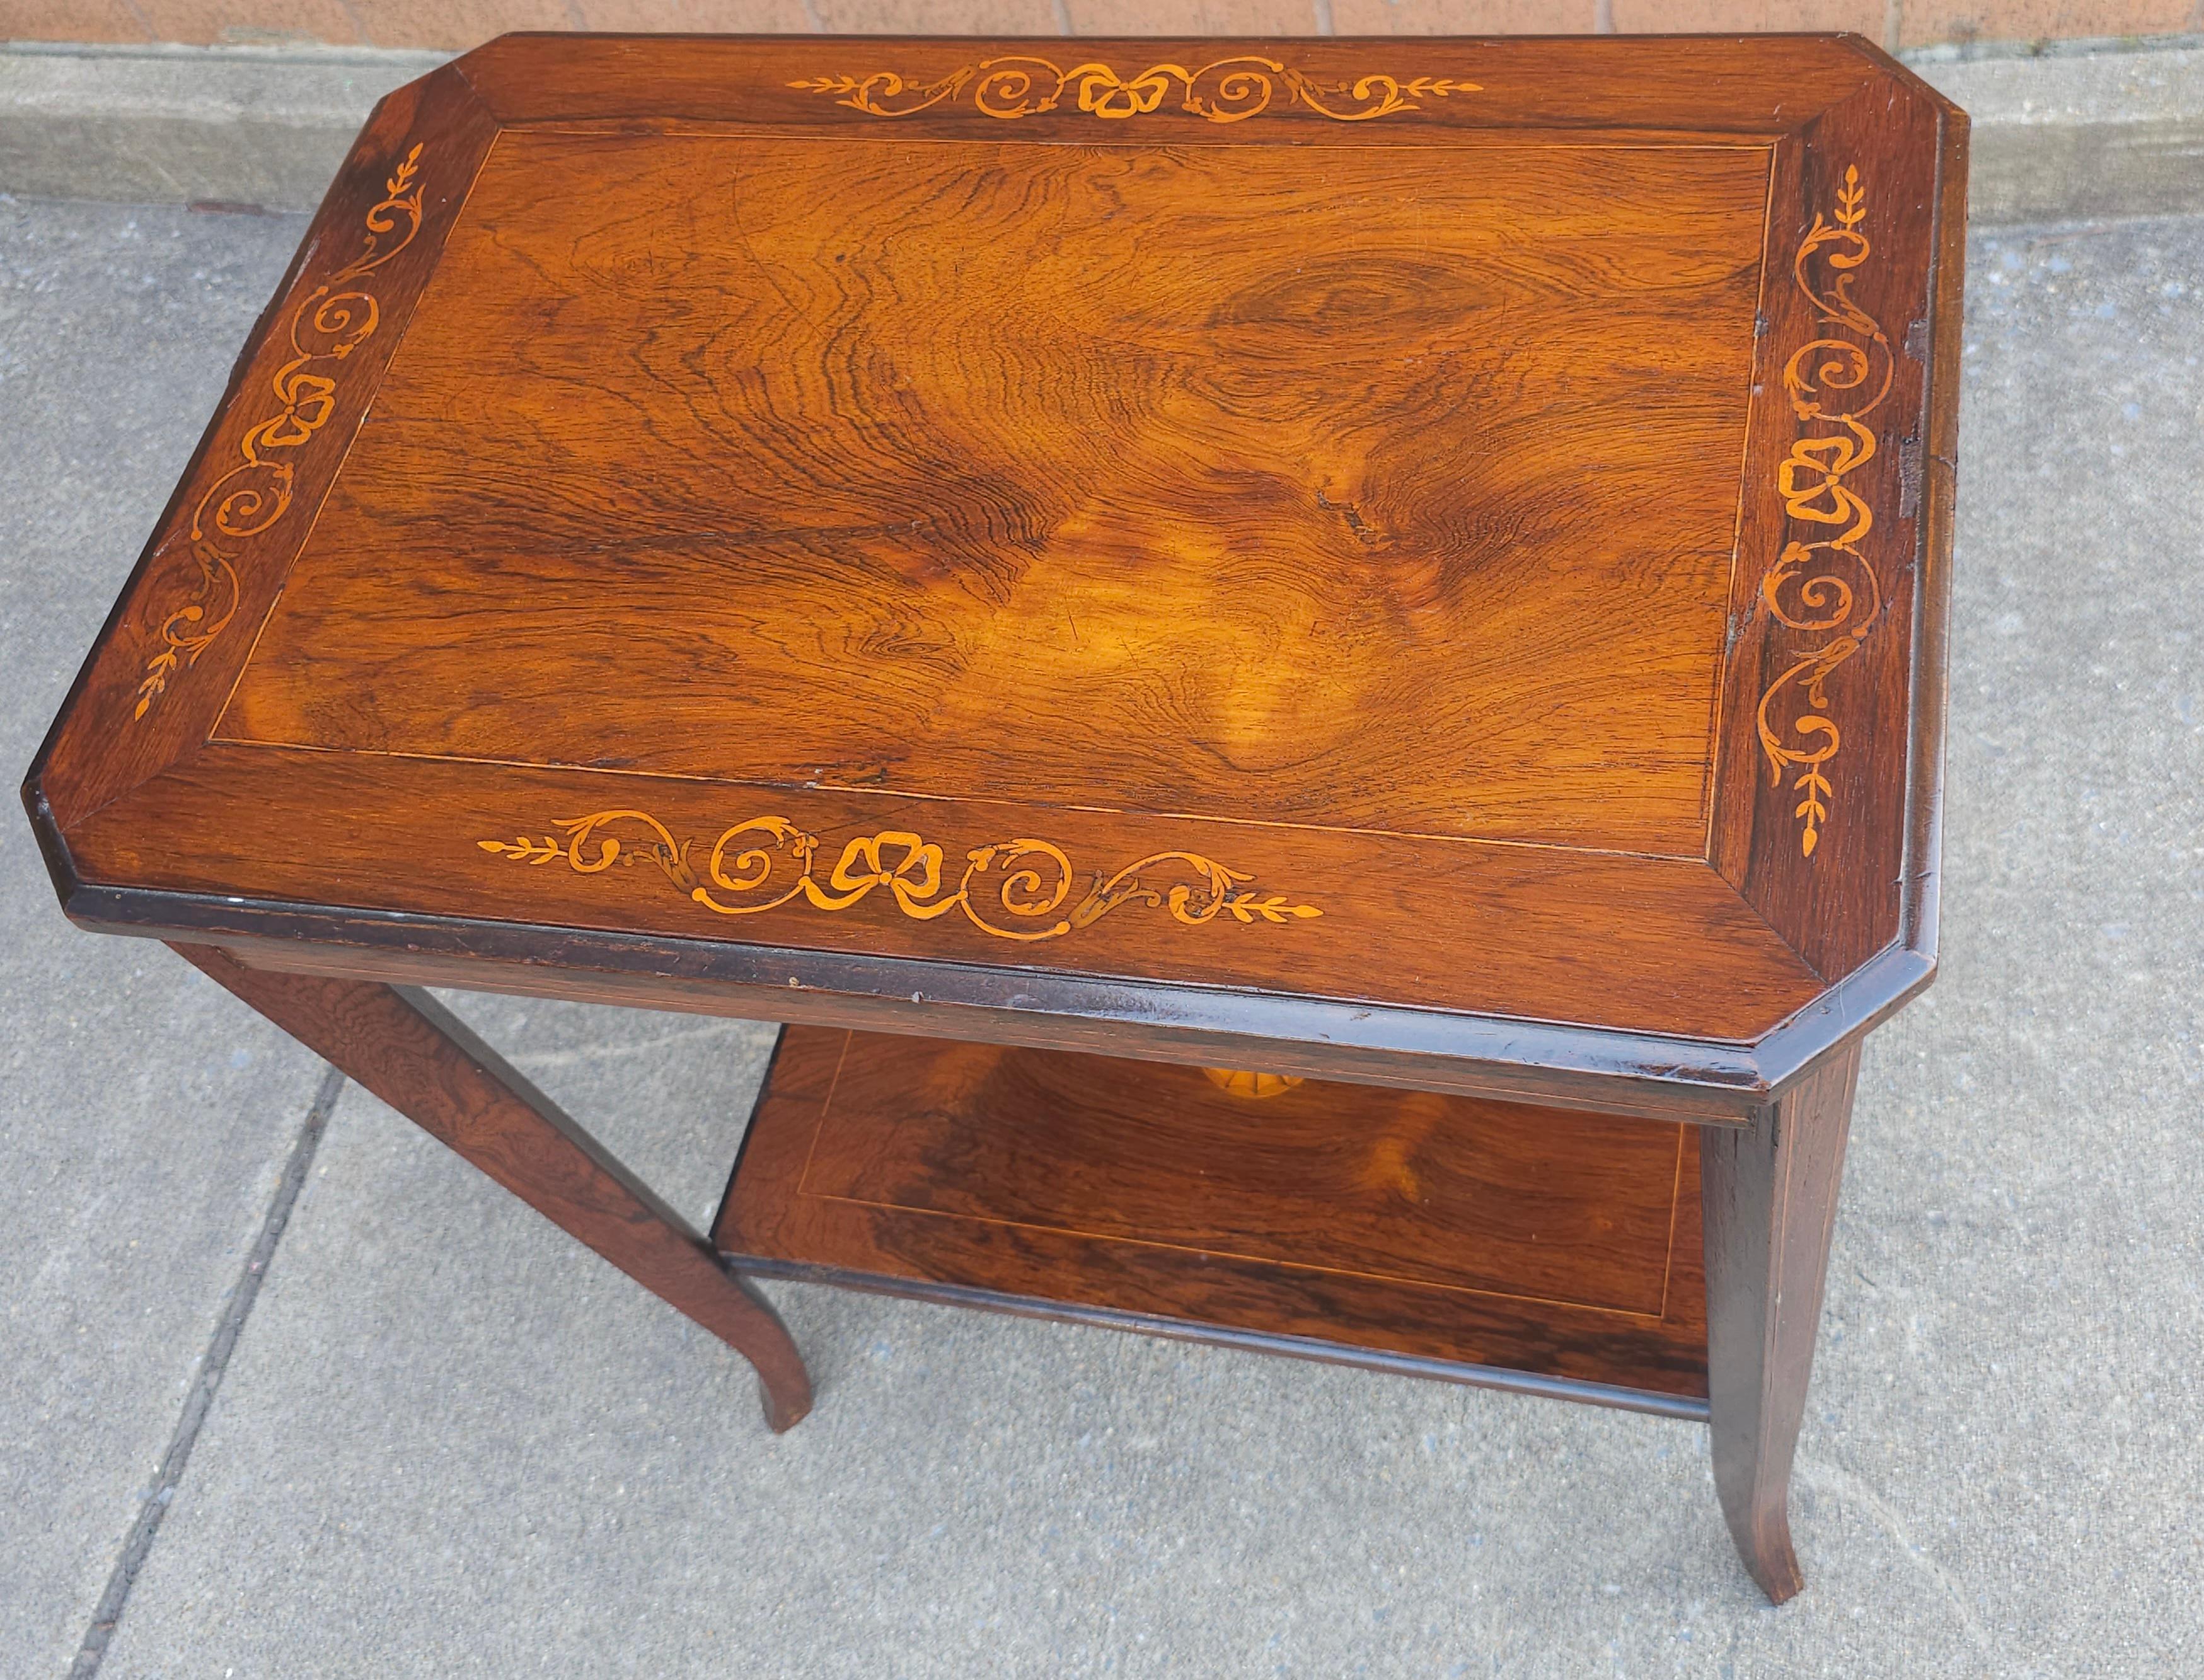 An Early 20th Century Edwardian Rosewood Marquetry Inlaid two tier Side Table. Measures 15.75